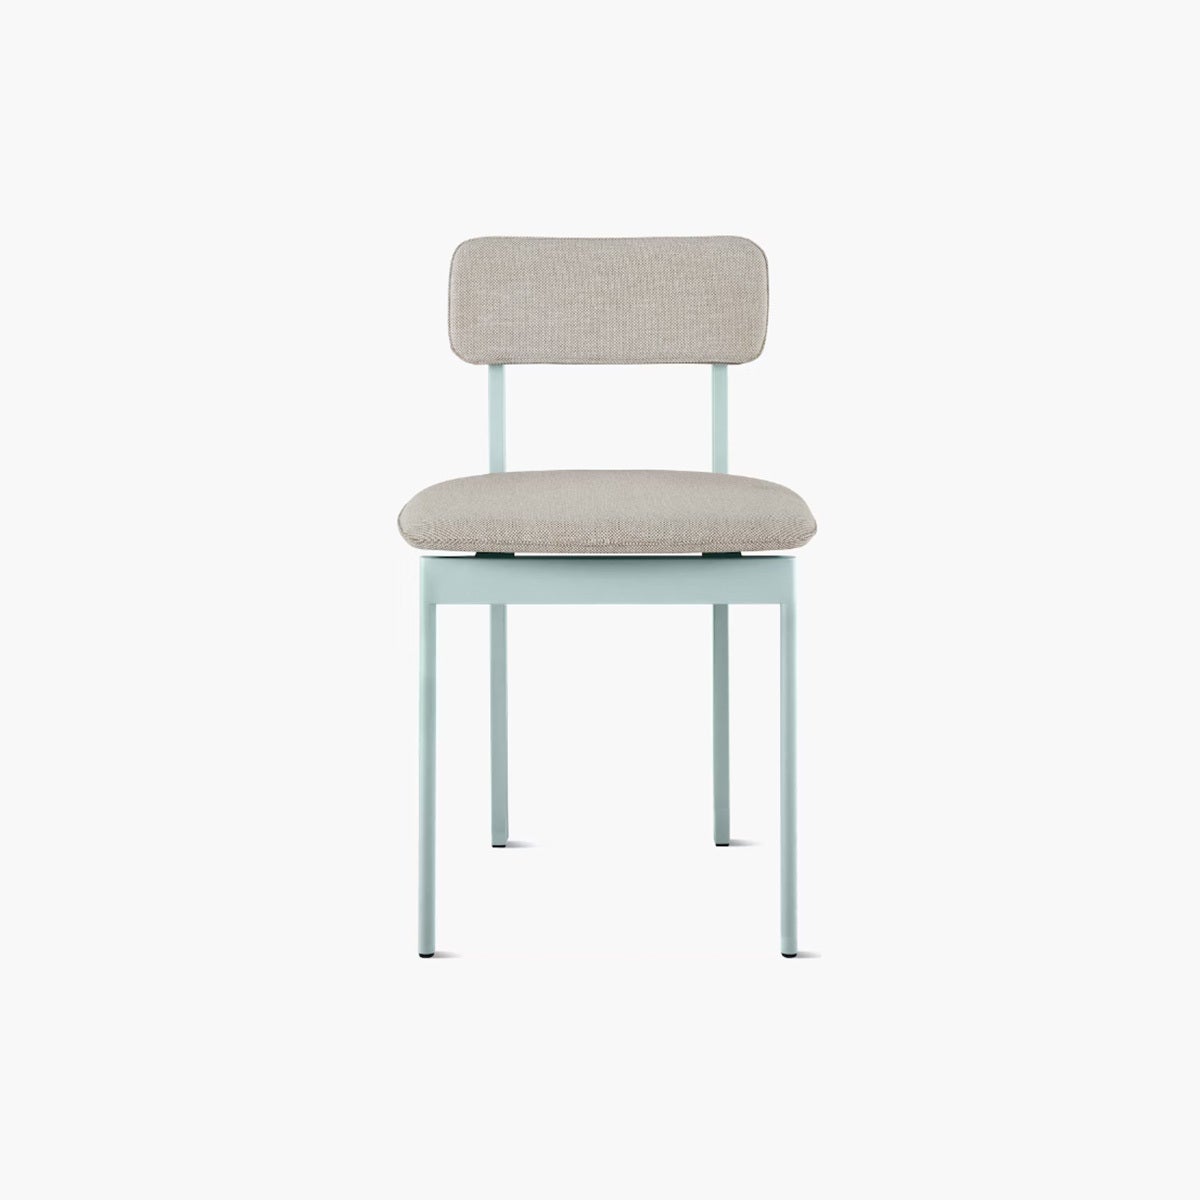 Blue and gray armless dining chair